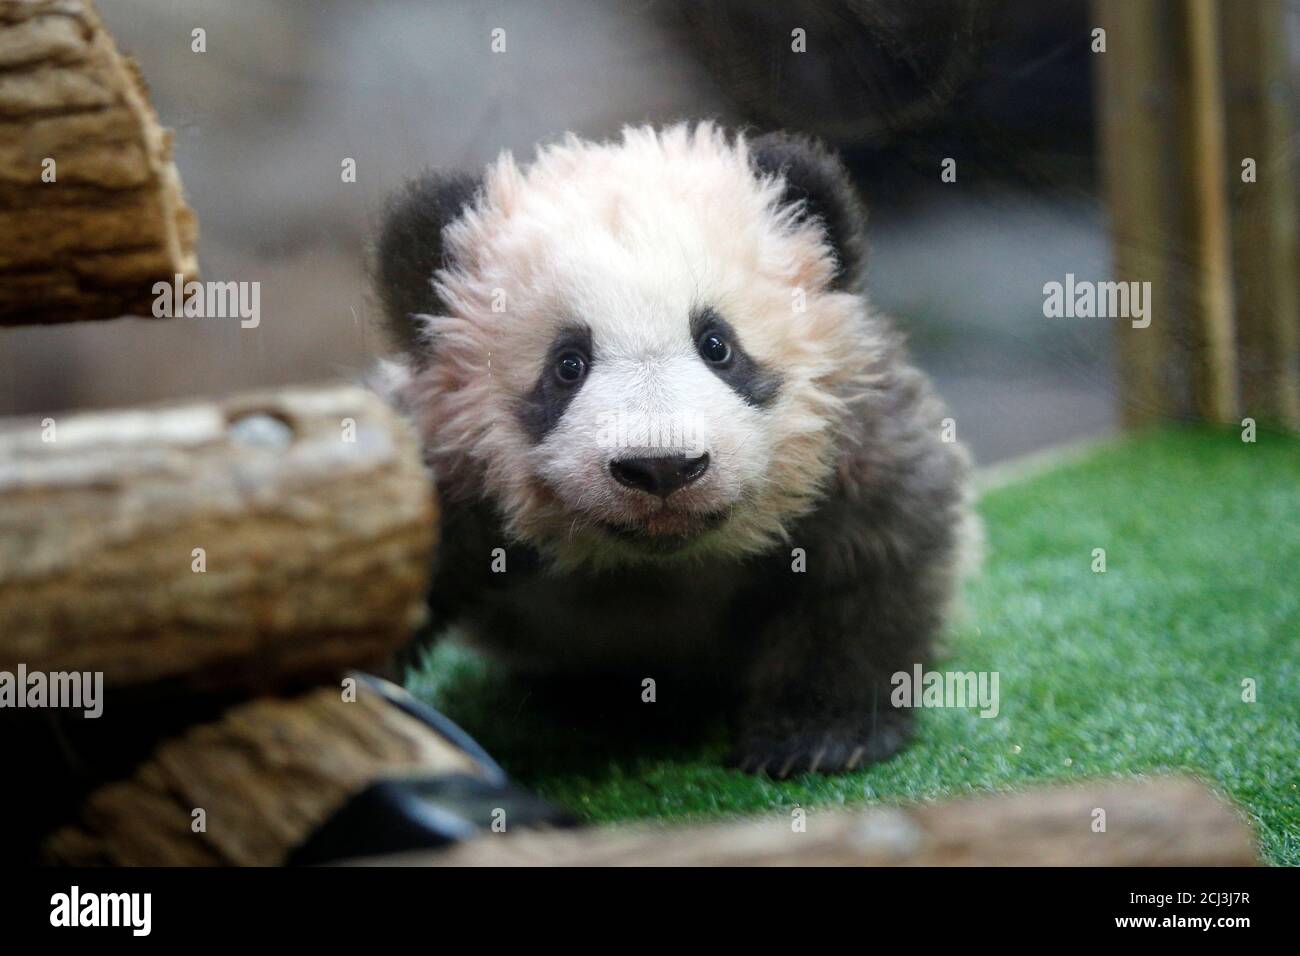 A four-month-old cub named Yuan Meng, which means “the realization of a wish” or “accomplishment of a dream”, is pictured during it naming ceremony at the Beauval Zoo in Saint-Aignan-sur-Cher, France, December 4, 2017.     REUTERS/Thibault Camus/Pool Stock Photo